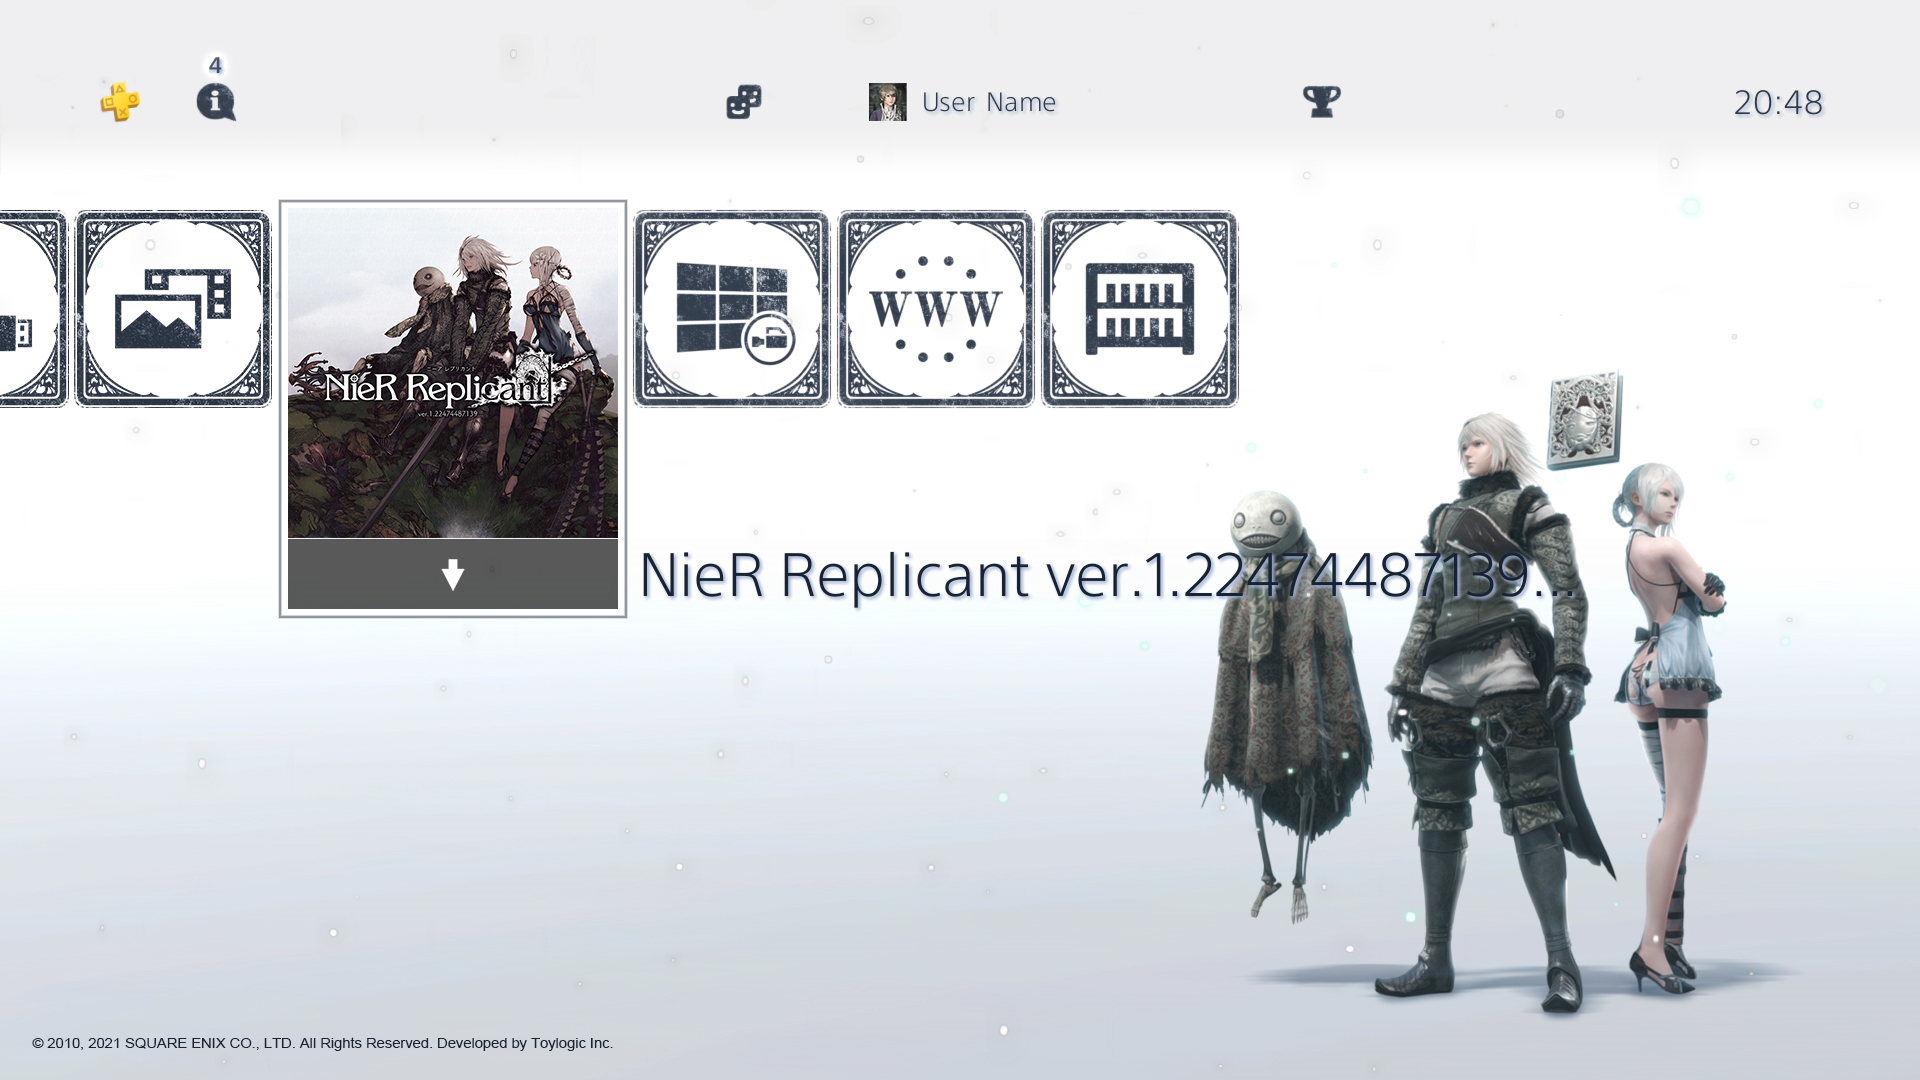 Where Does NieR Replicant Ver.1.22474487139 Fit In The NieR Timeline?